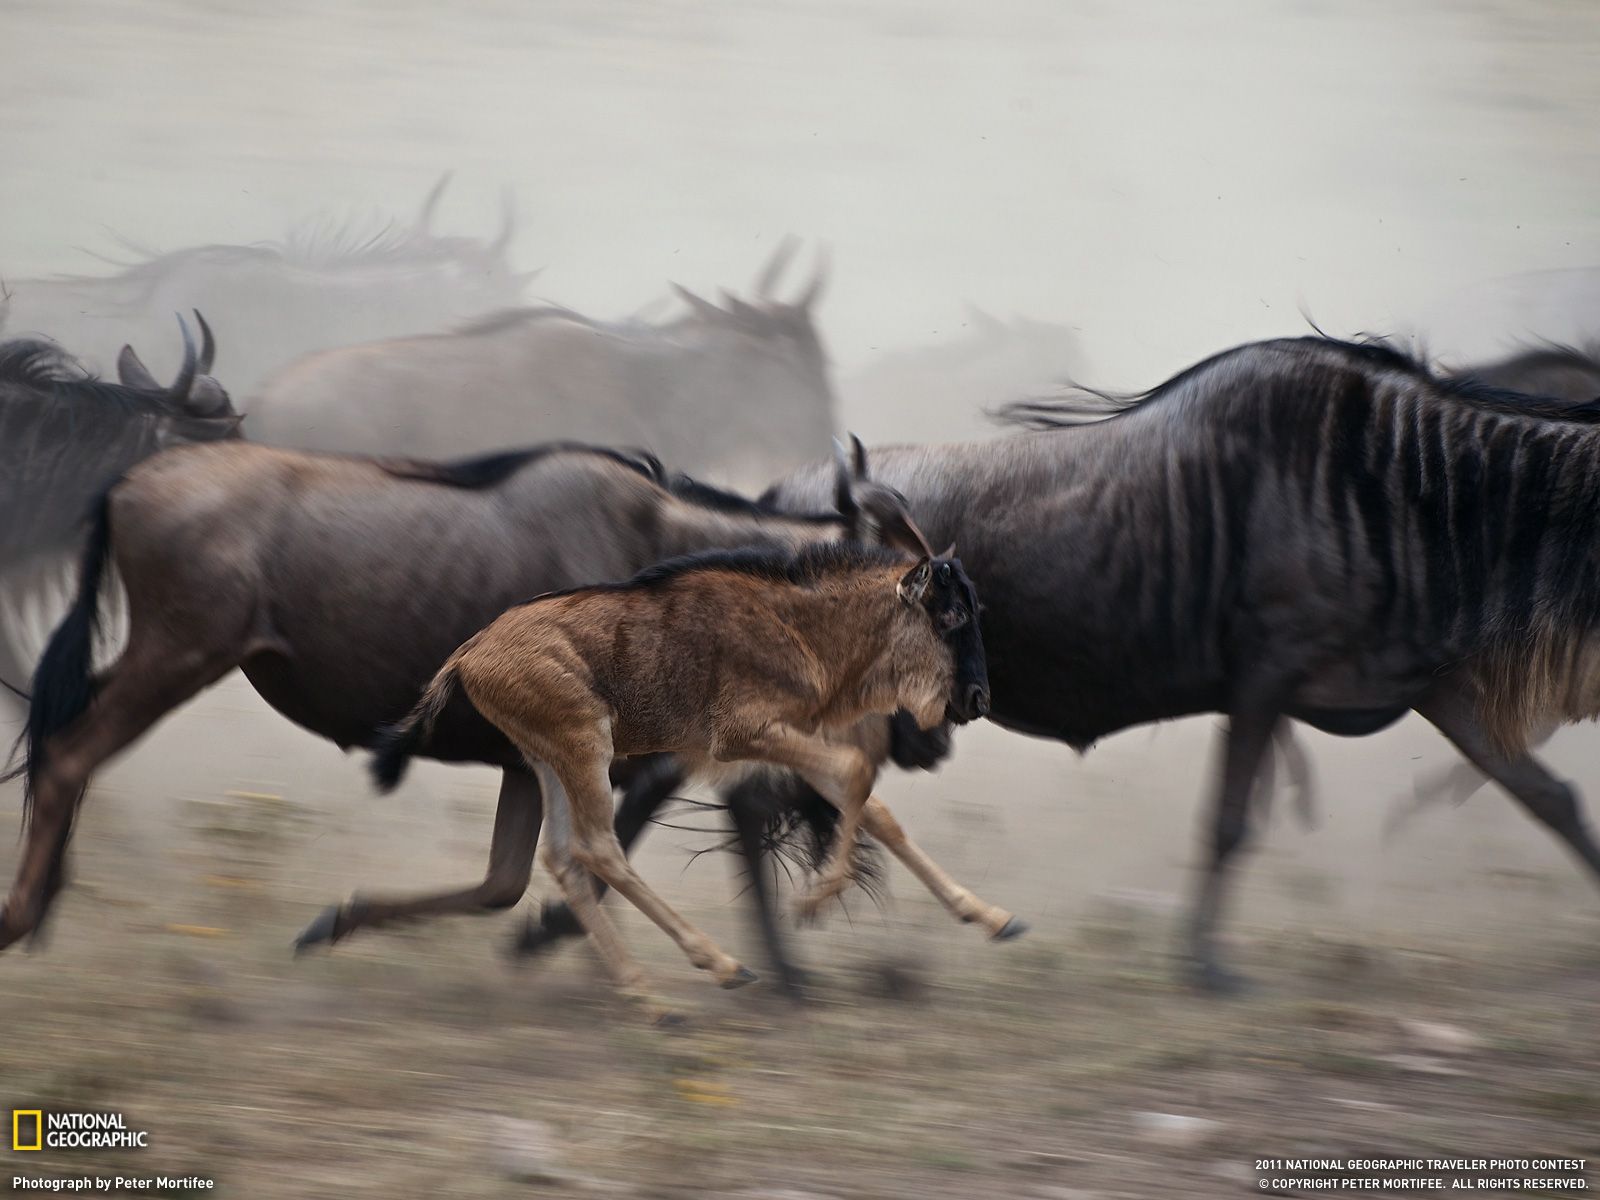 Wildebeest Picture – Animal Wallpaper - National Geographic Photo ...